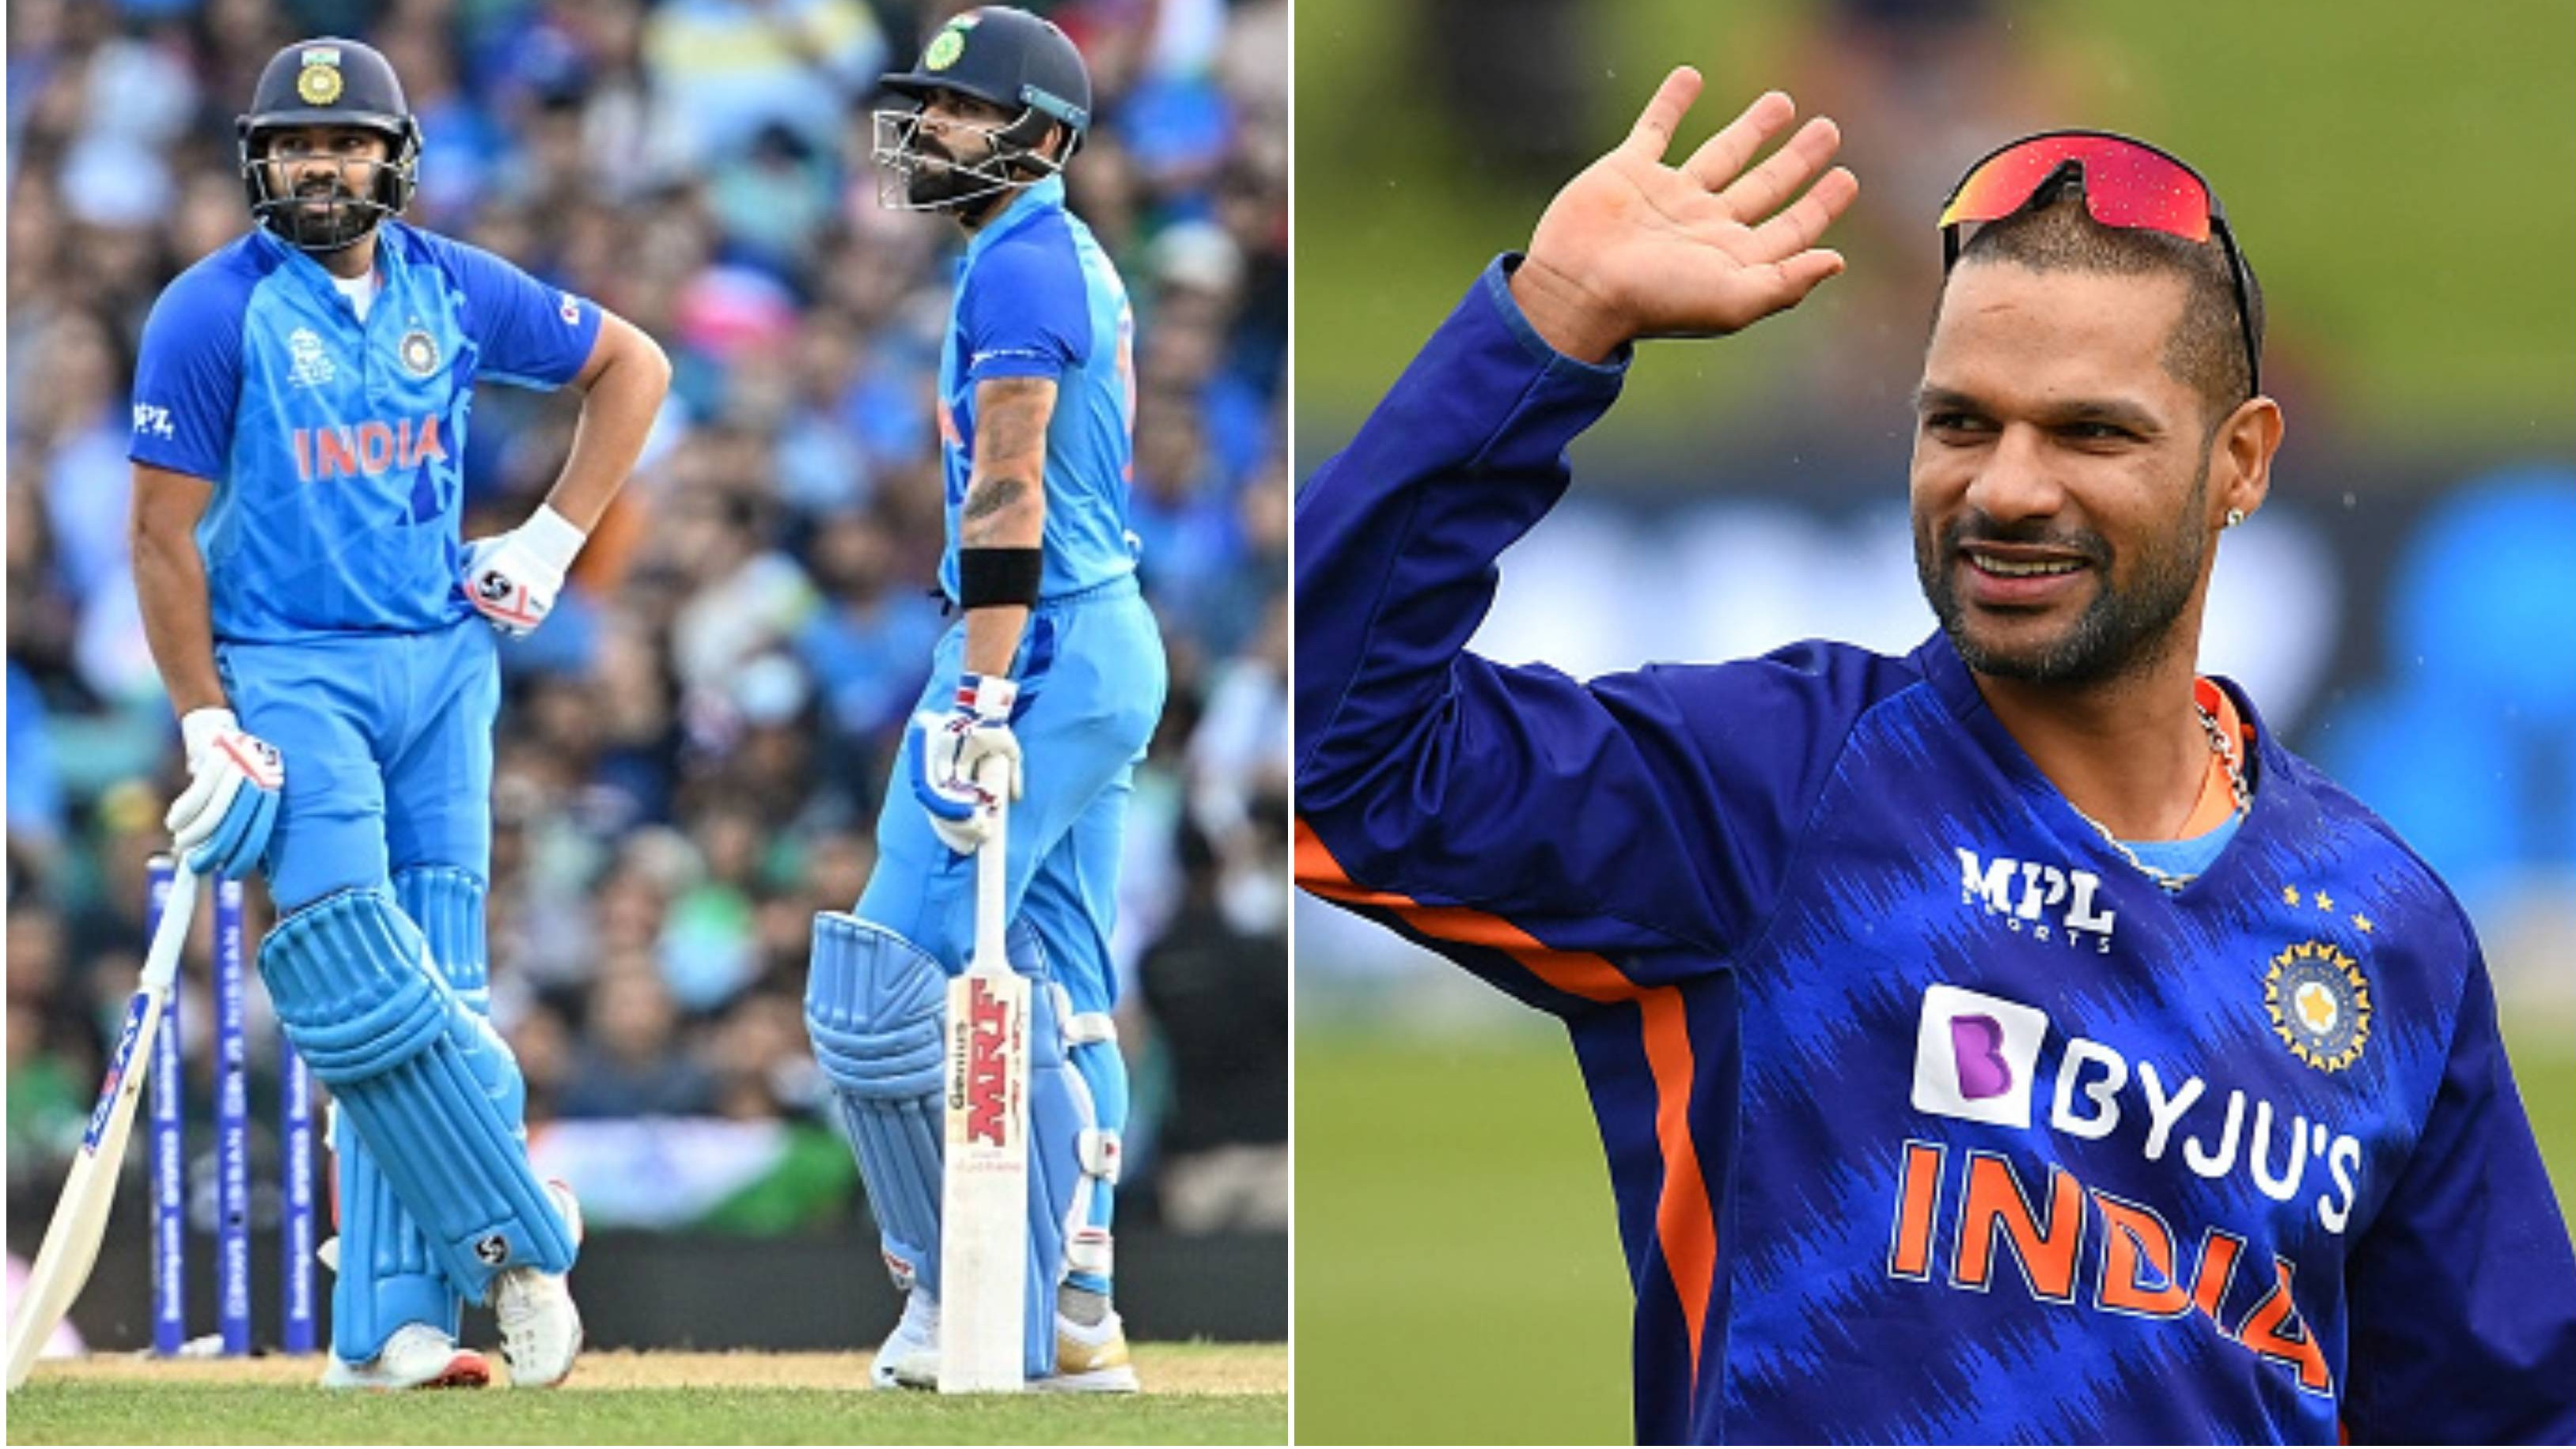 “Not speaking about Rohit or Virat,” Shikhar Dhawan on ego clashes in the Indian team